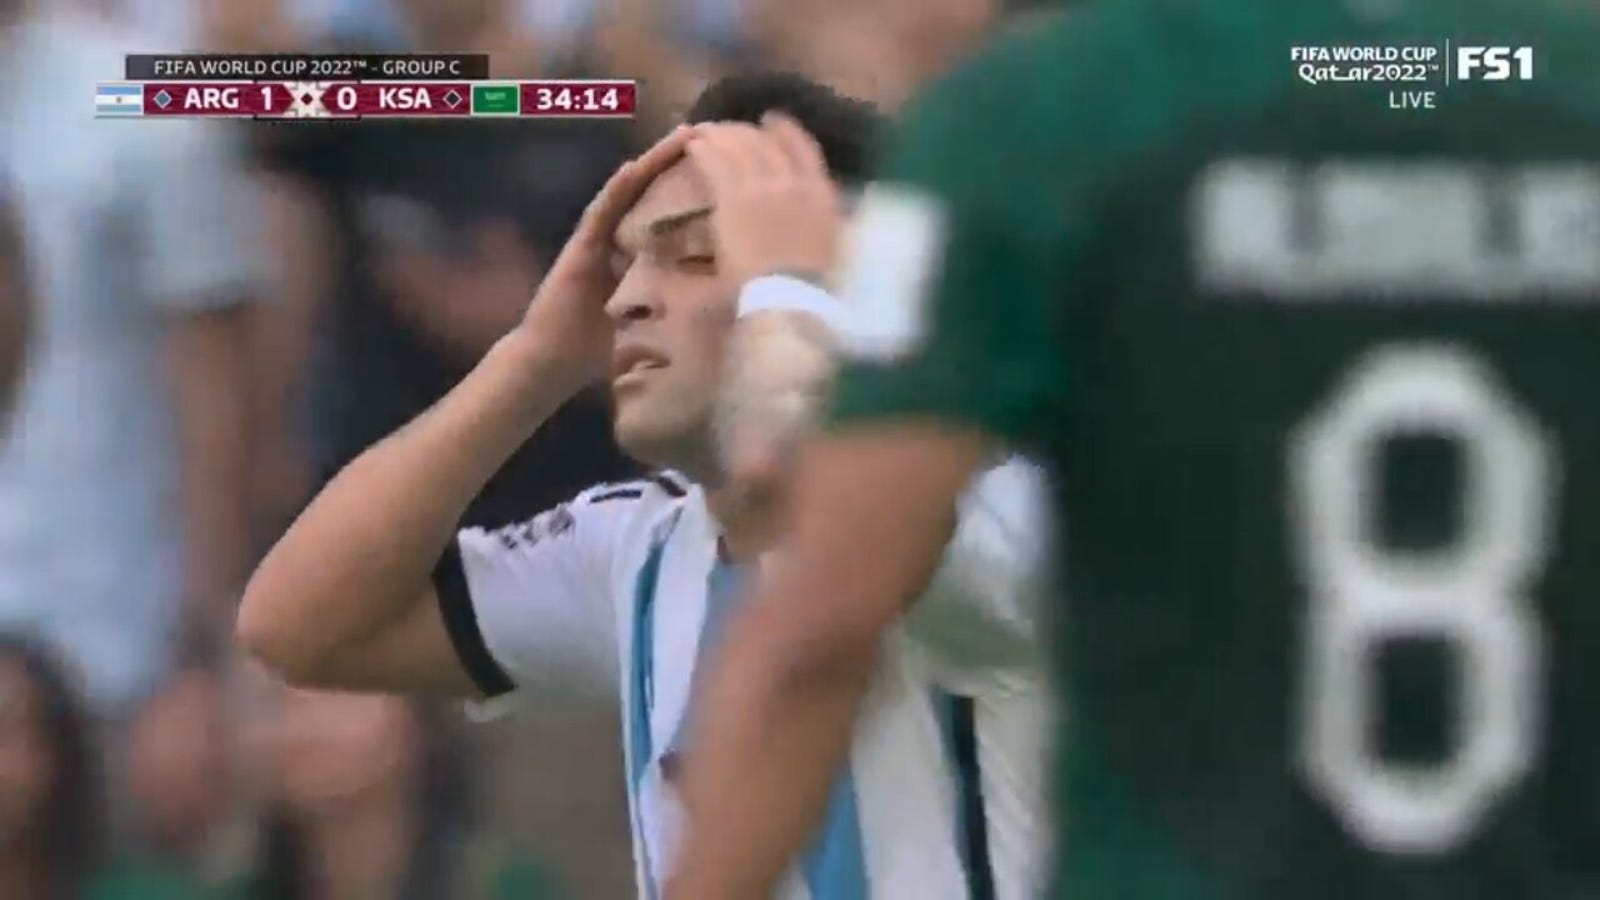 Argentina scored seven times in total offside in the first half against Saudi Arabia